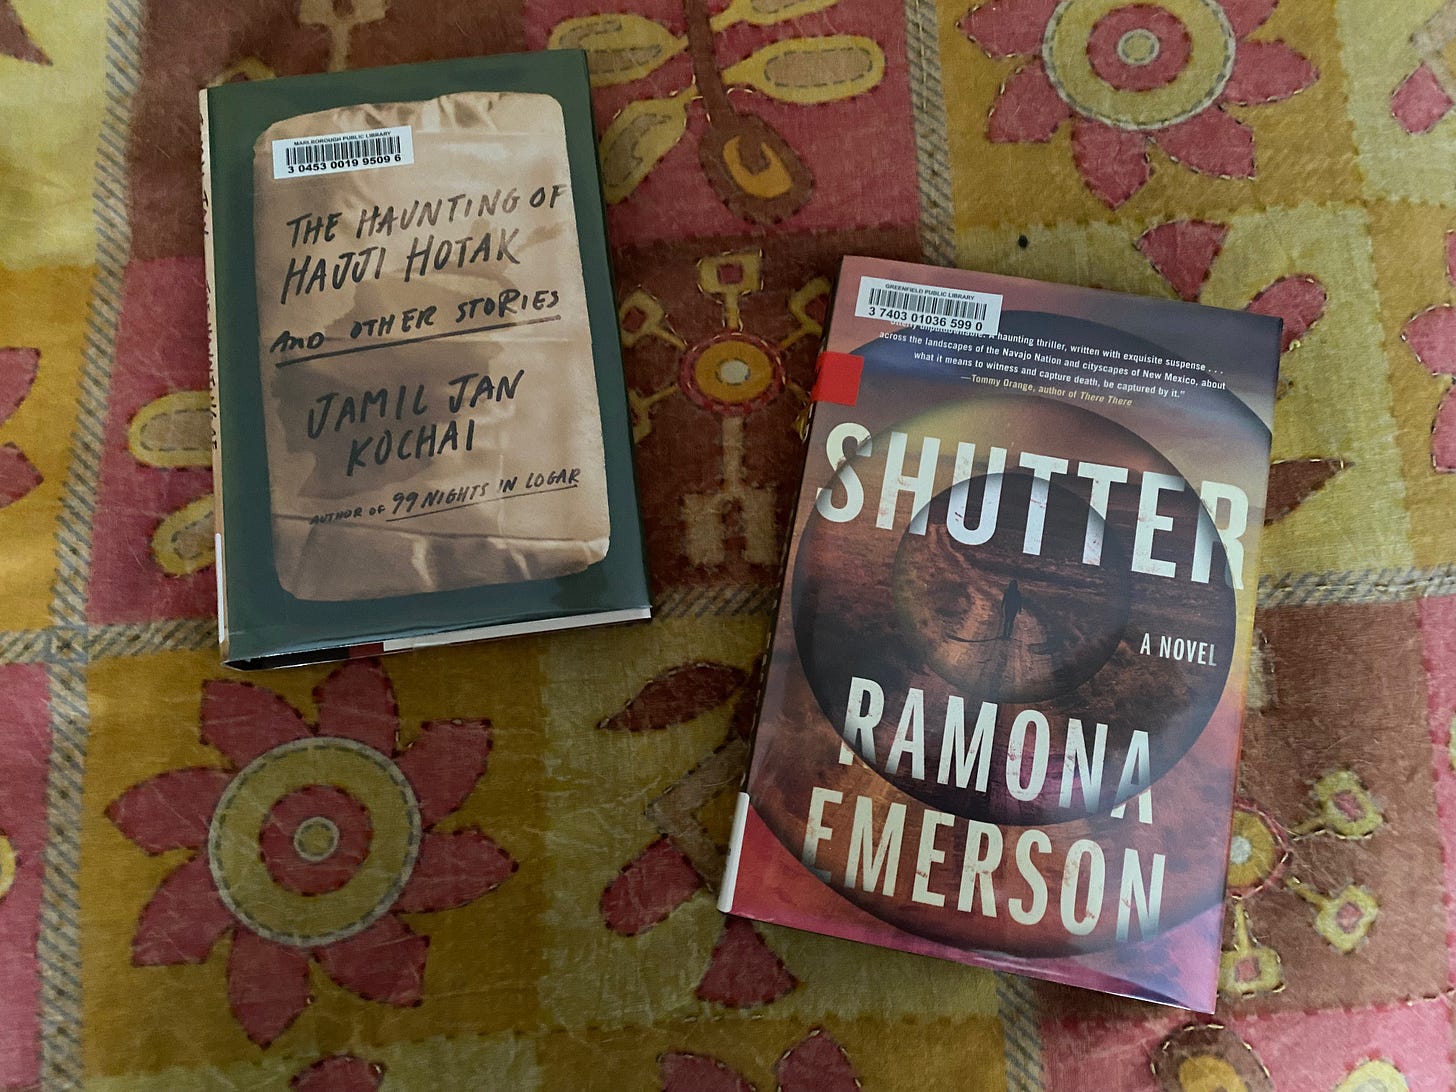 Two library books, The Haunting of Hajji Hotak and Shutter laid out next to each other on a colorful bedspread.